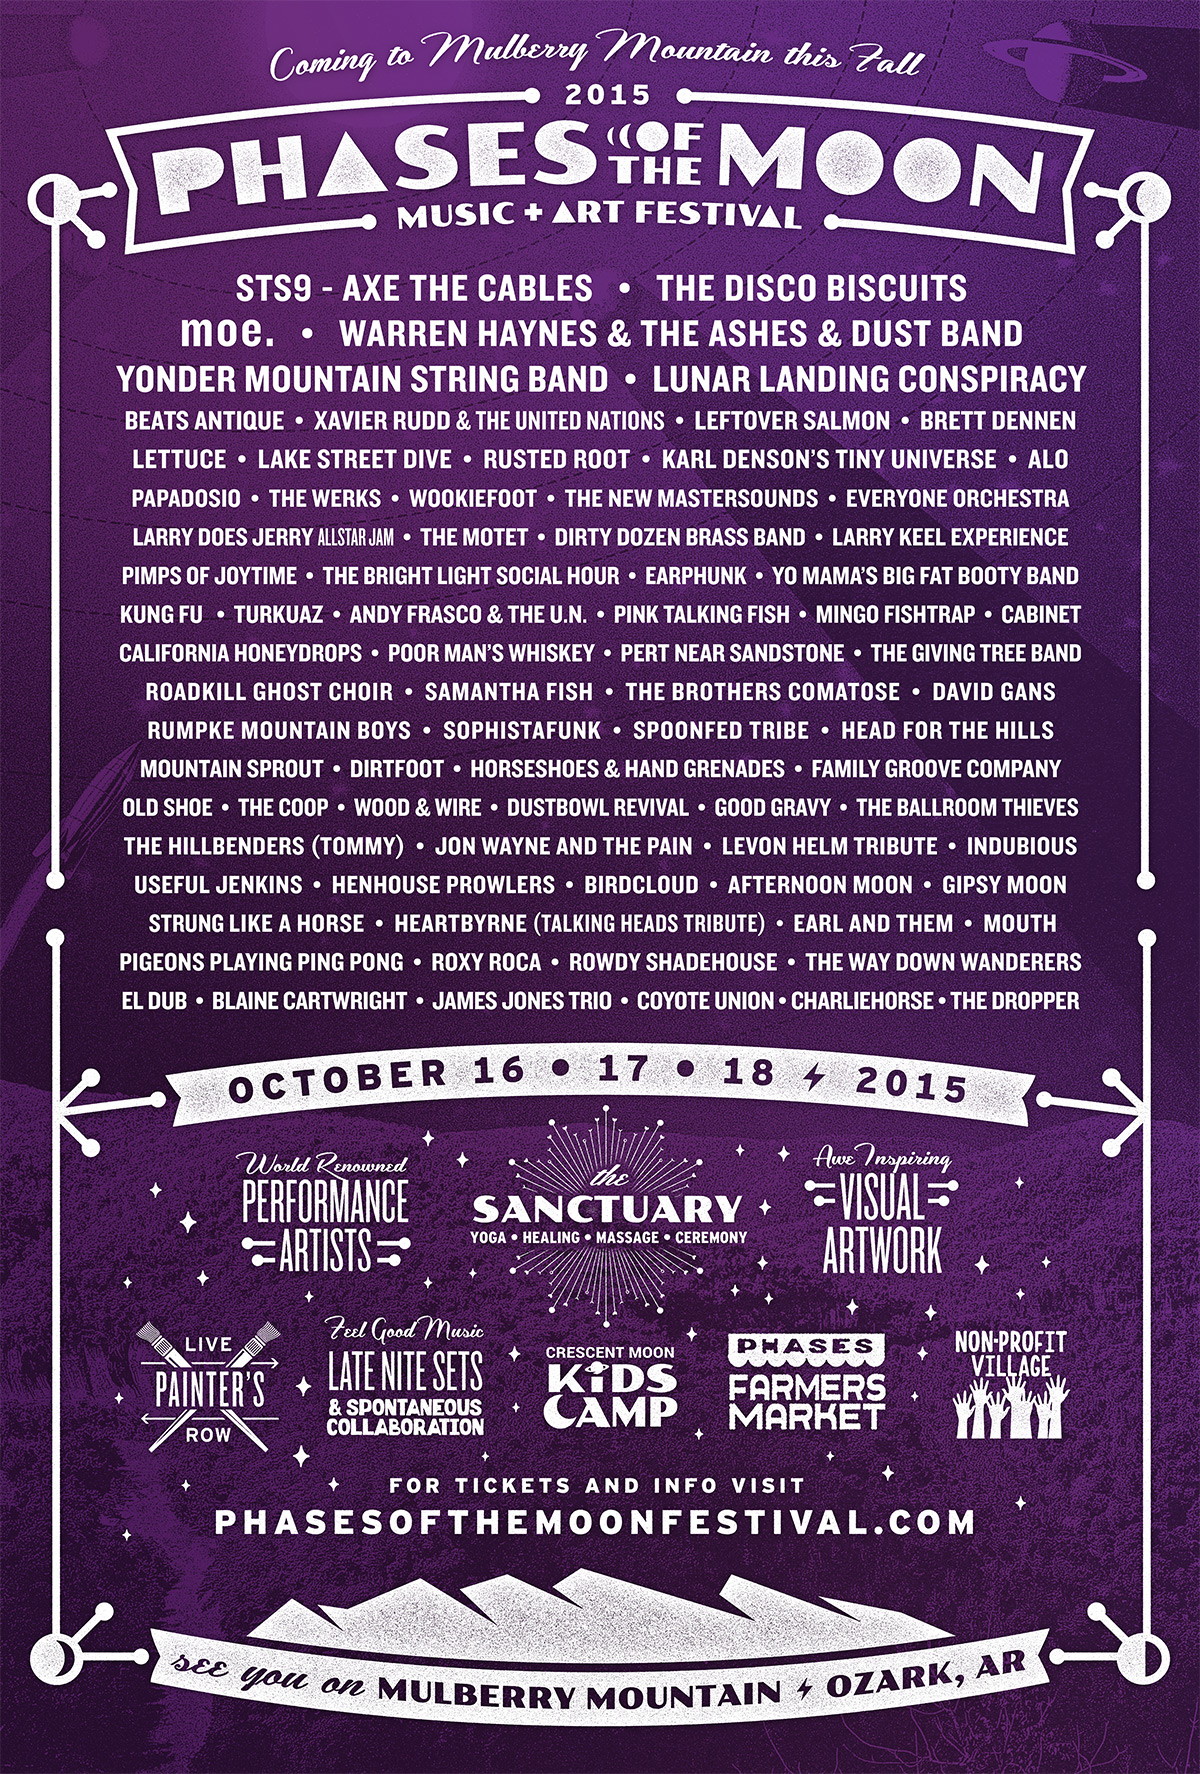 Phases of the Moon Music + Art Festival Announces Additional Artists